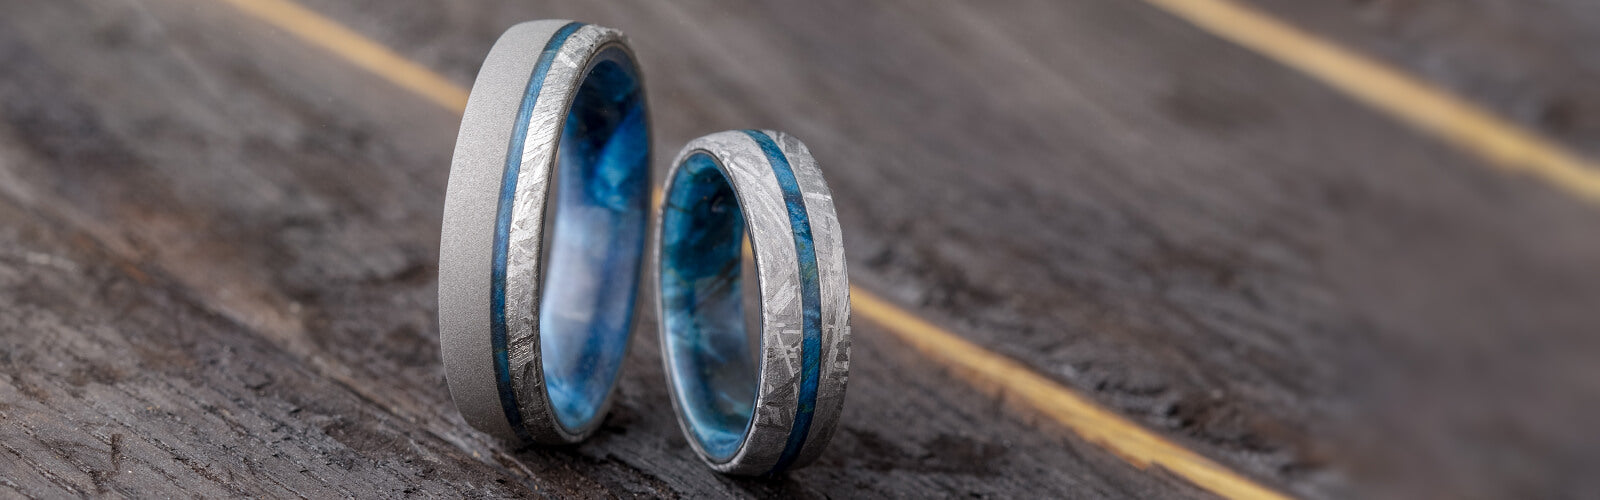 Plus Size Men's Wedding Bands from Jewelry by Johan